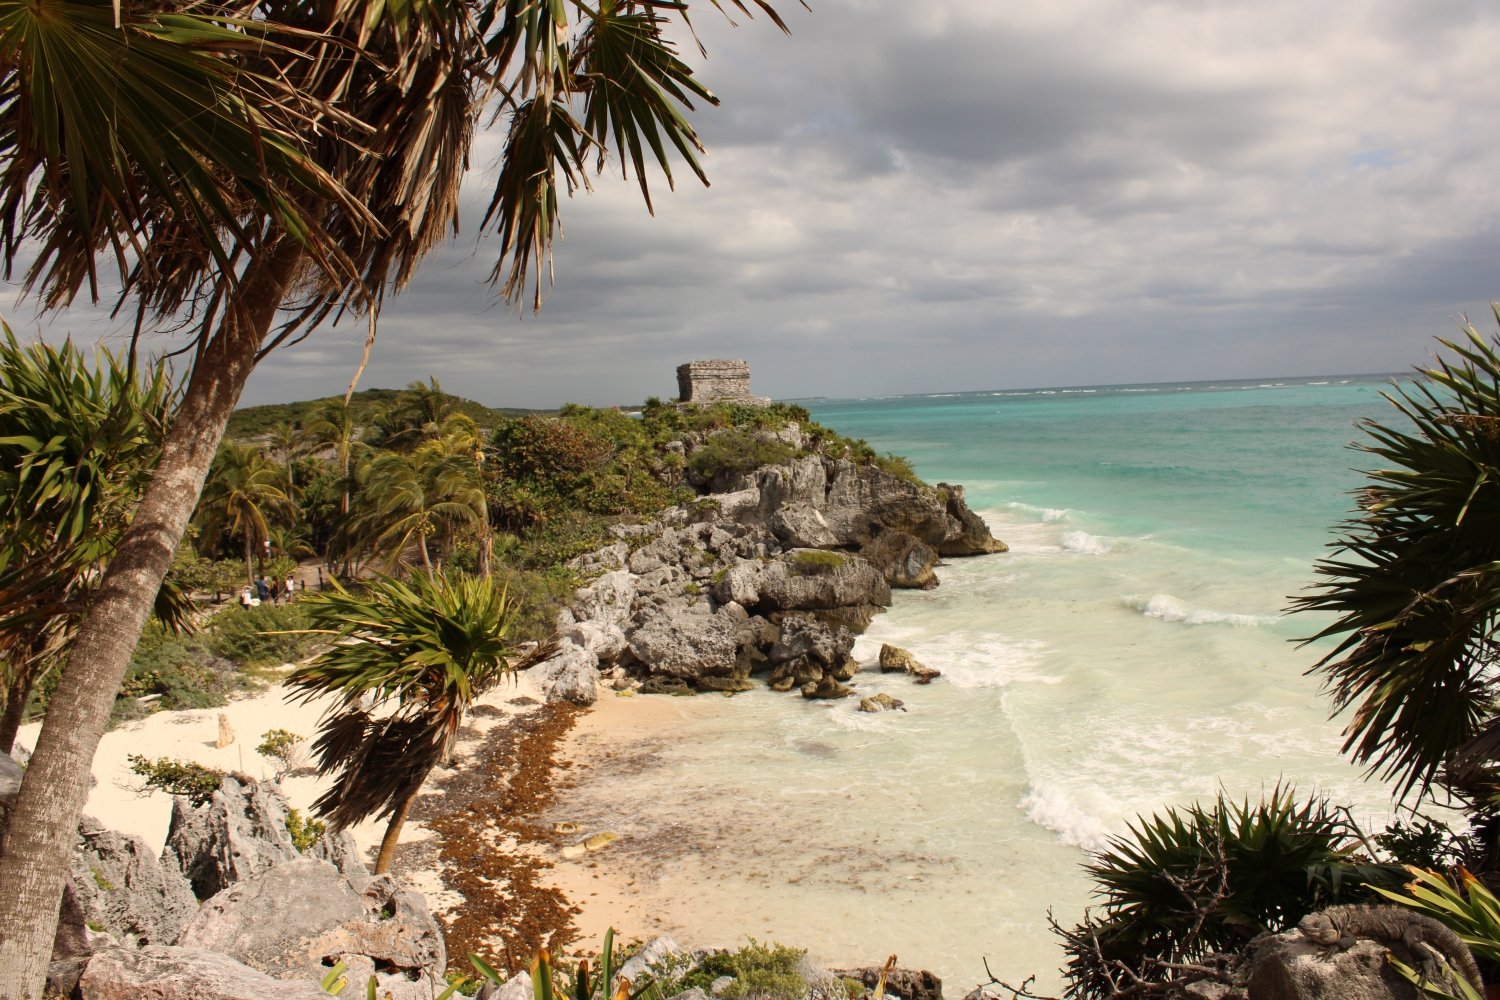 Excursions in the Riviera Maya